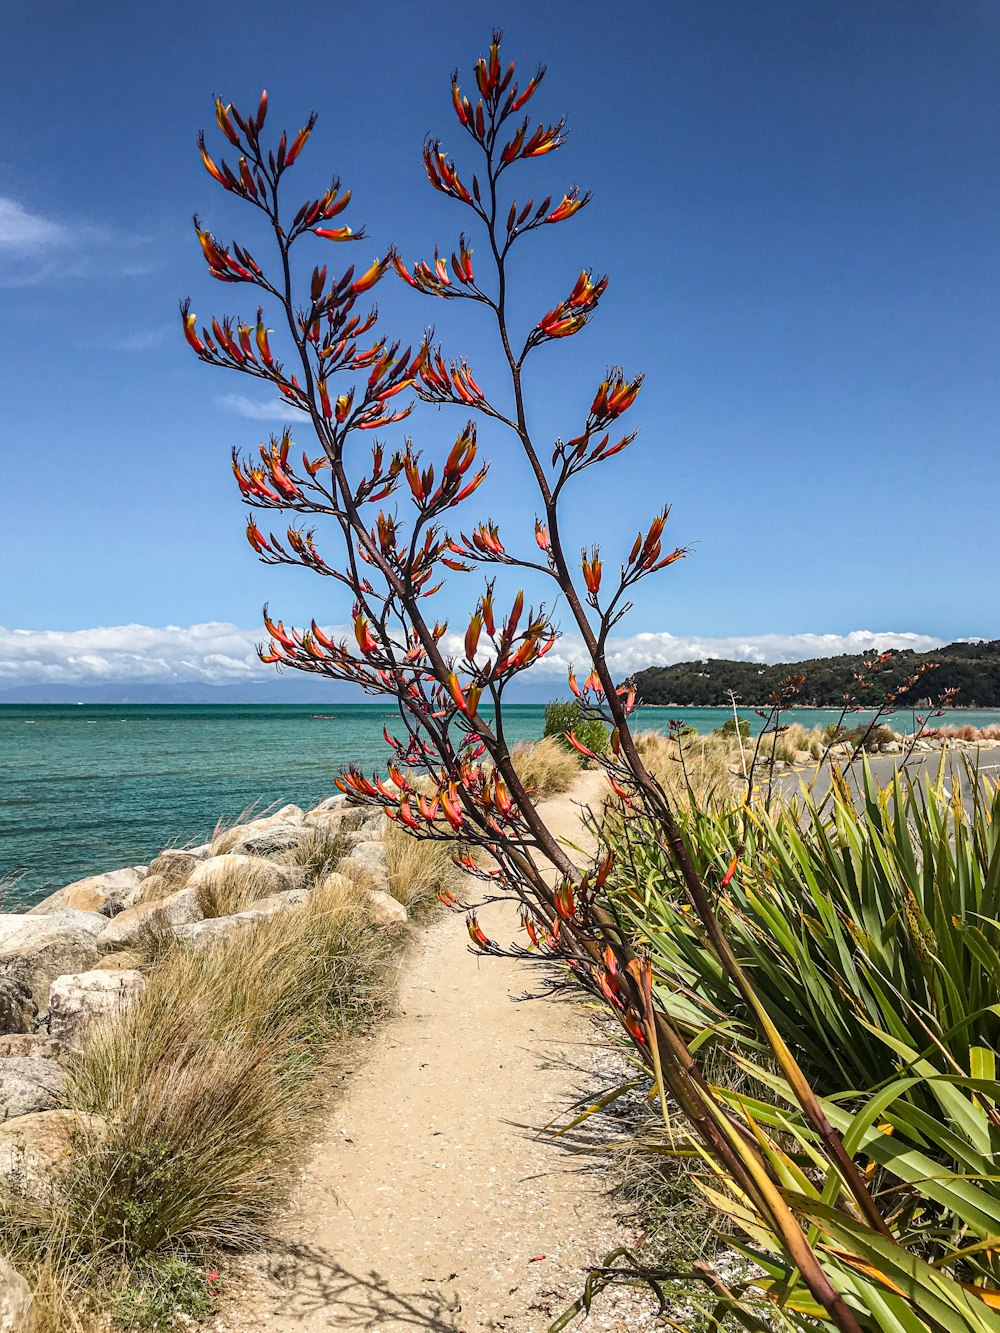 a plant with red flowers near the ocean